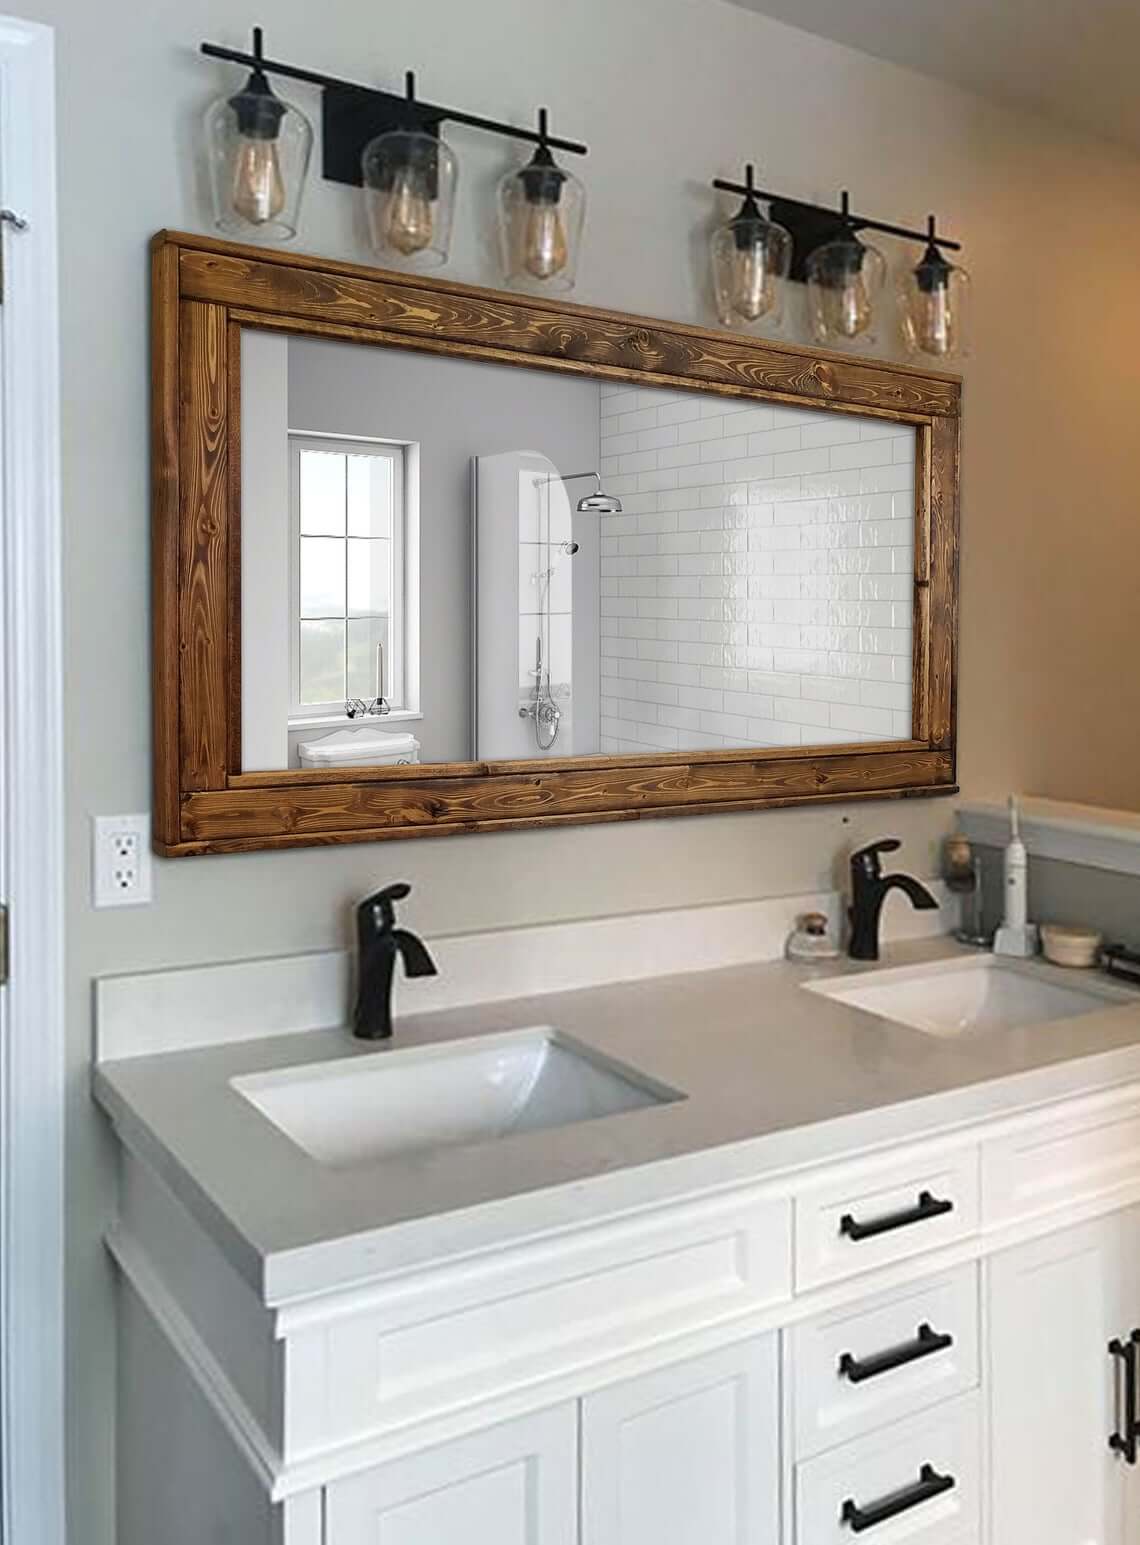 Stunning and Rich Wood Trimmed Vanity Mirror